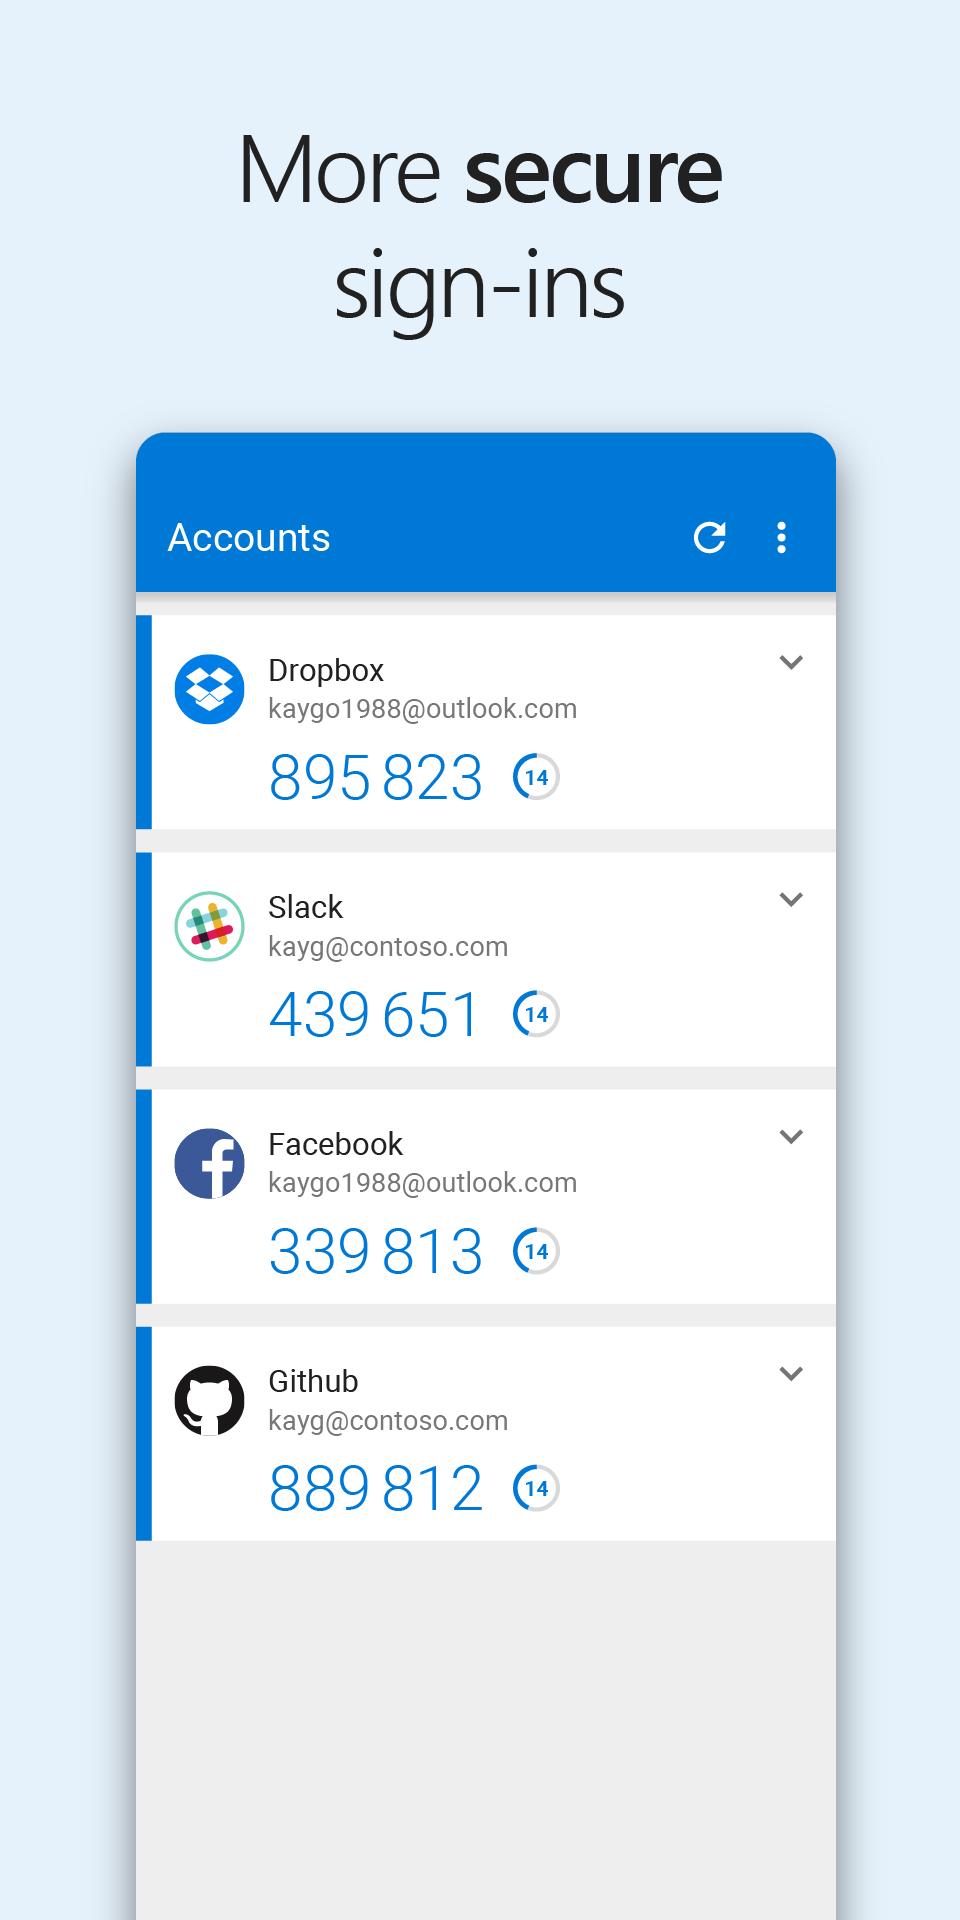 what is the authenticator app for skype